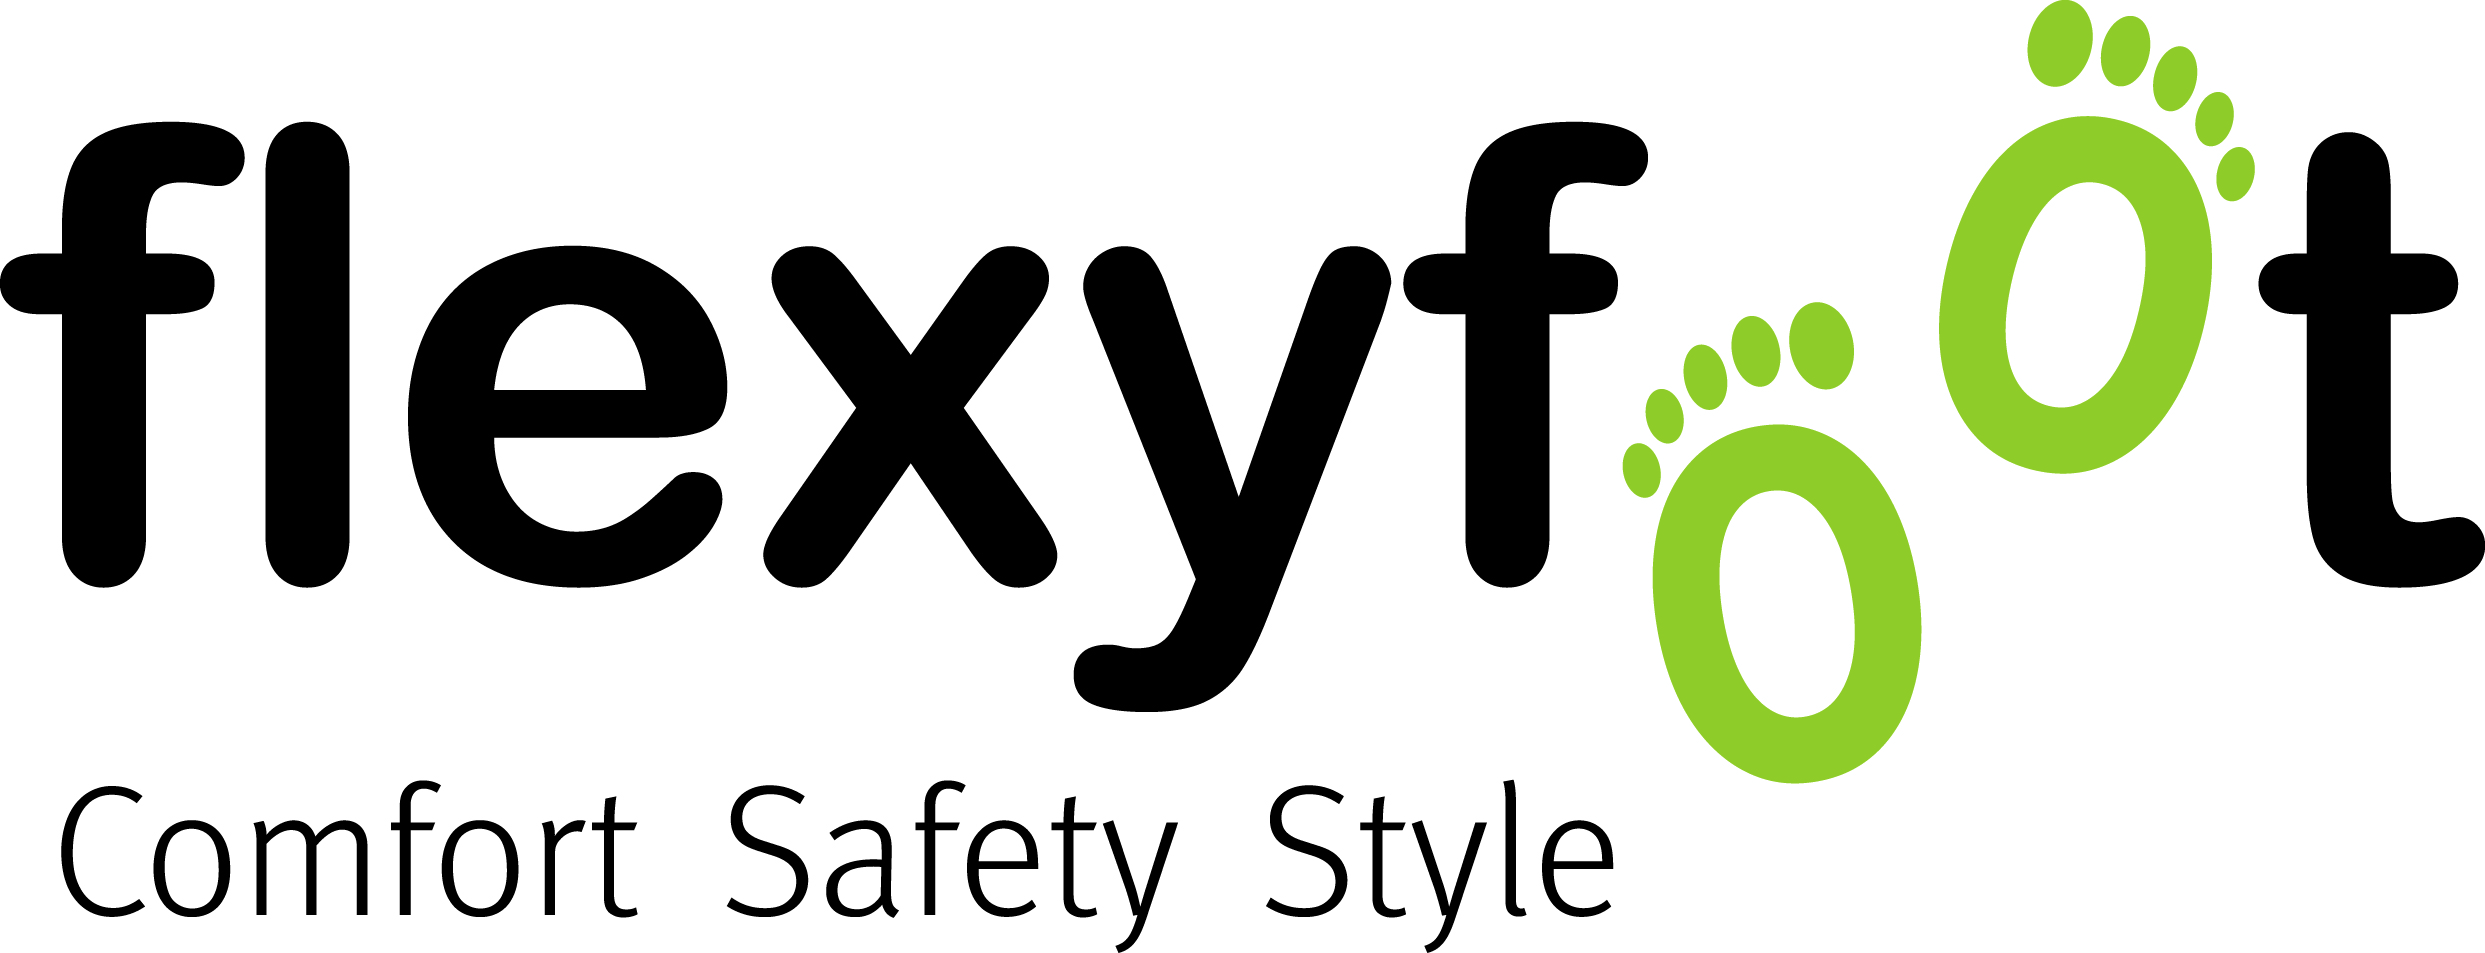 We supply flexyfoot products at our mobility shops